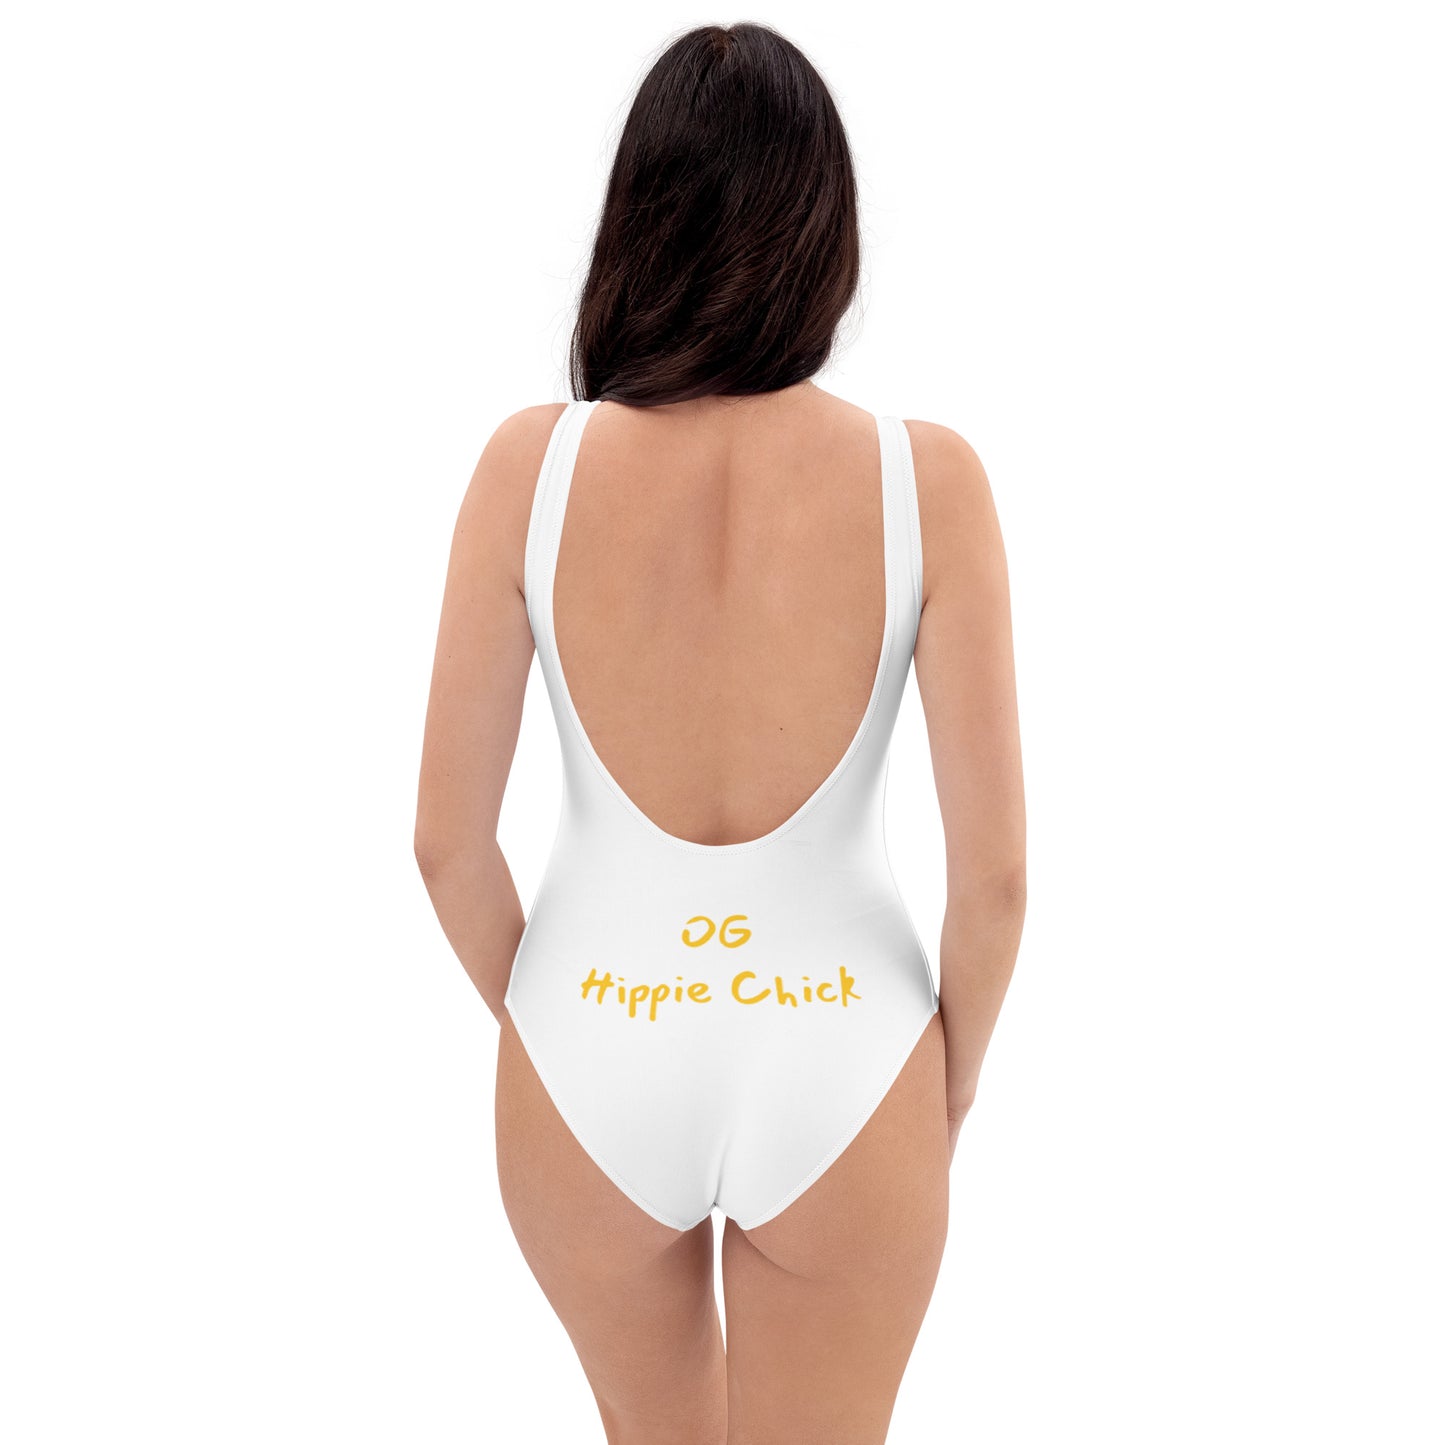 White One Piece Swimsuit